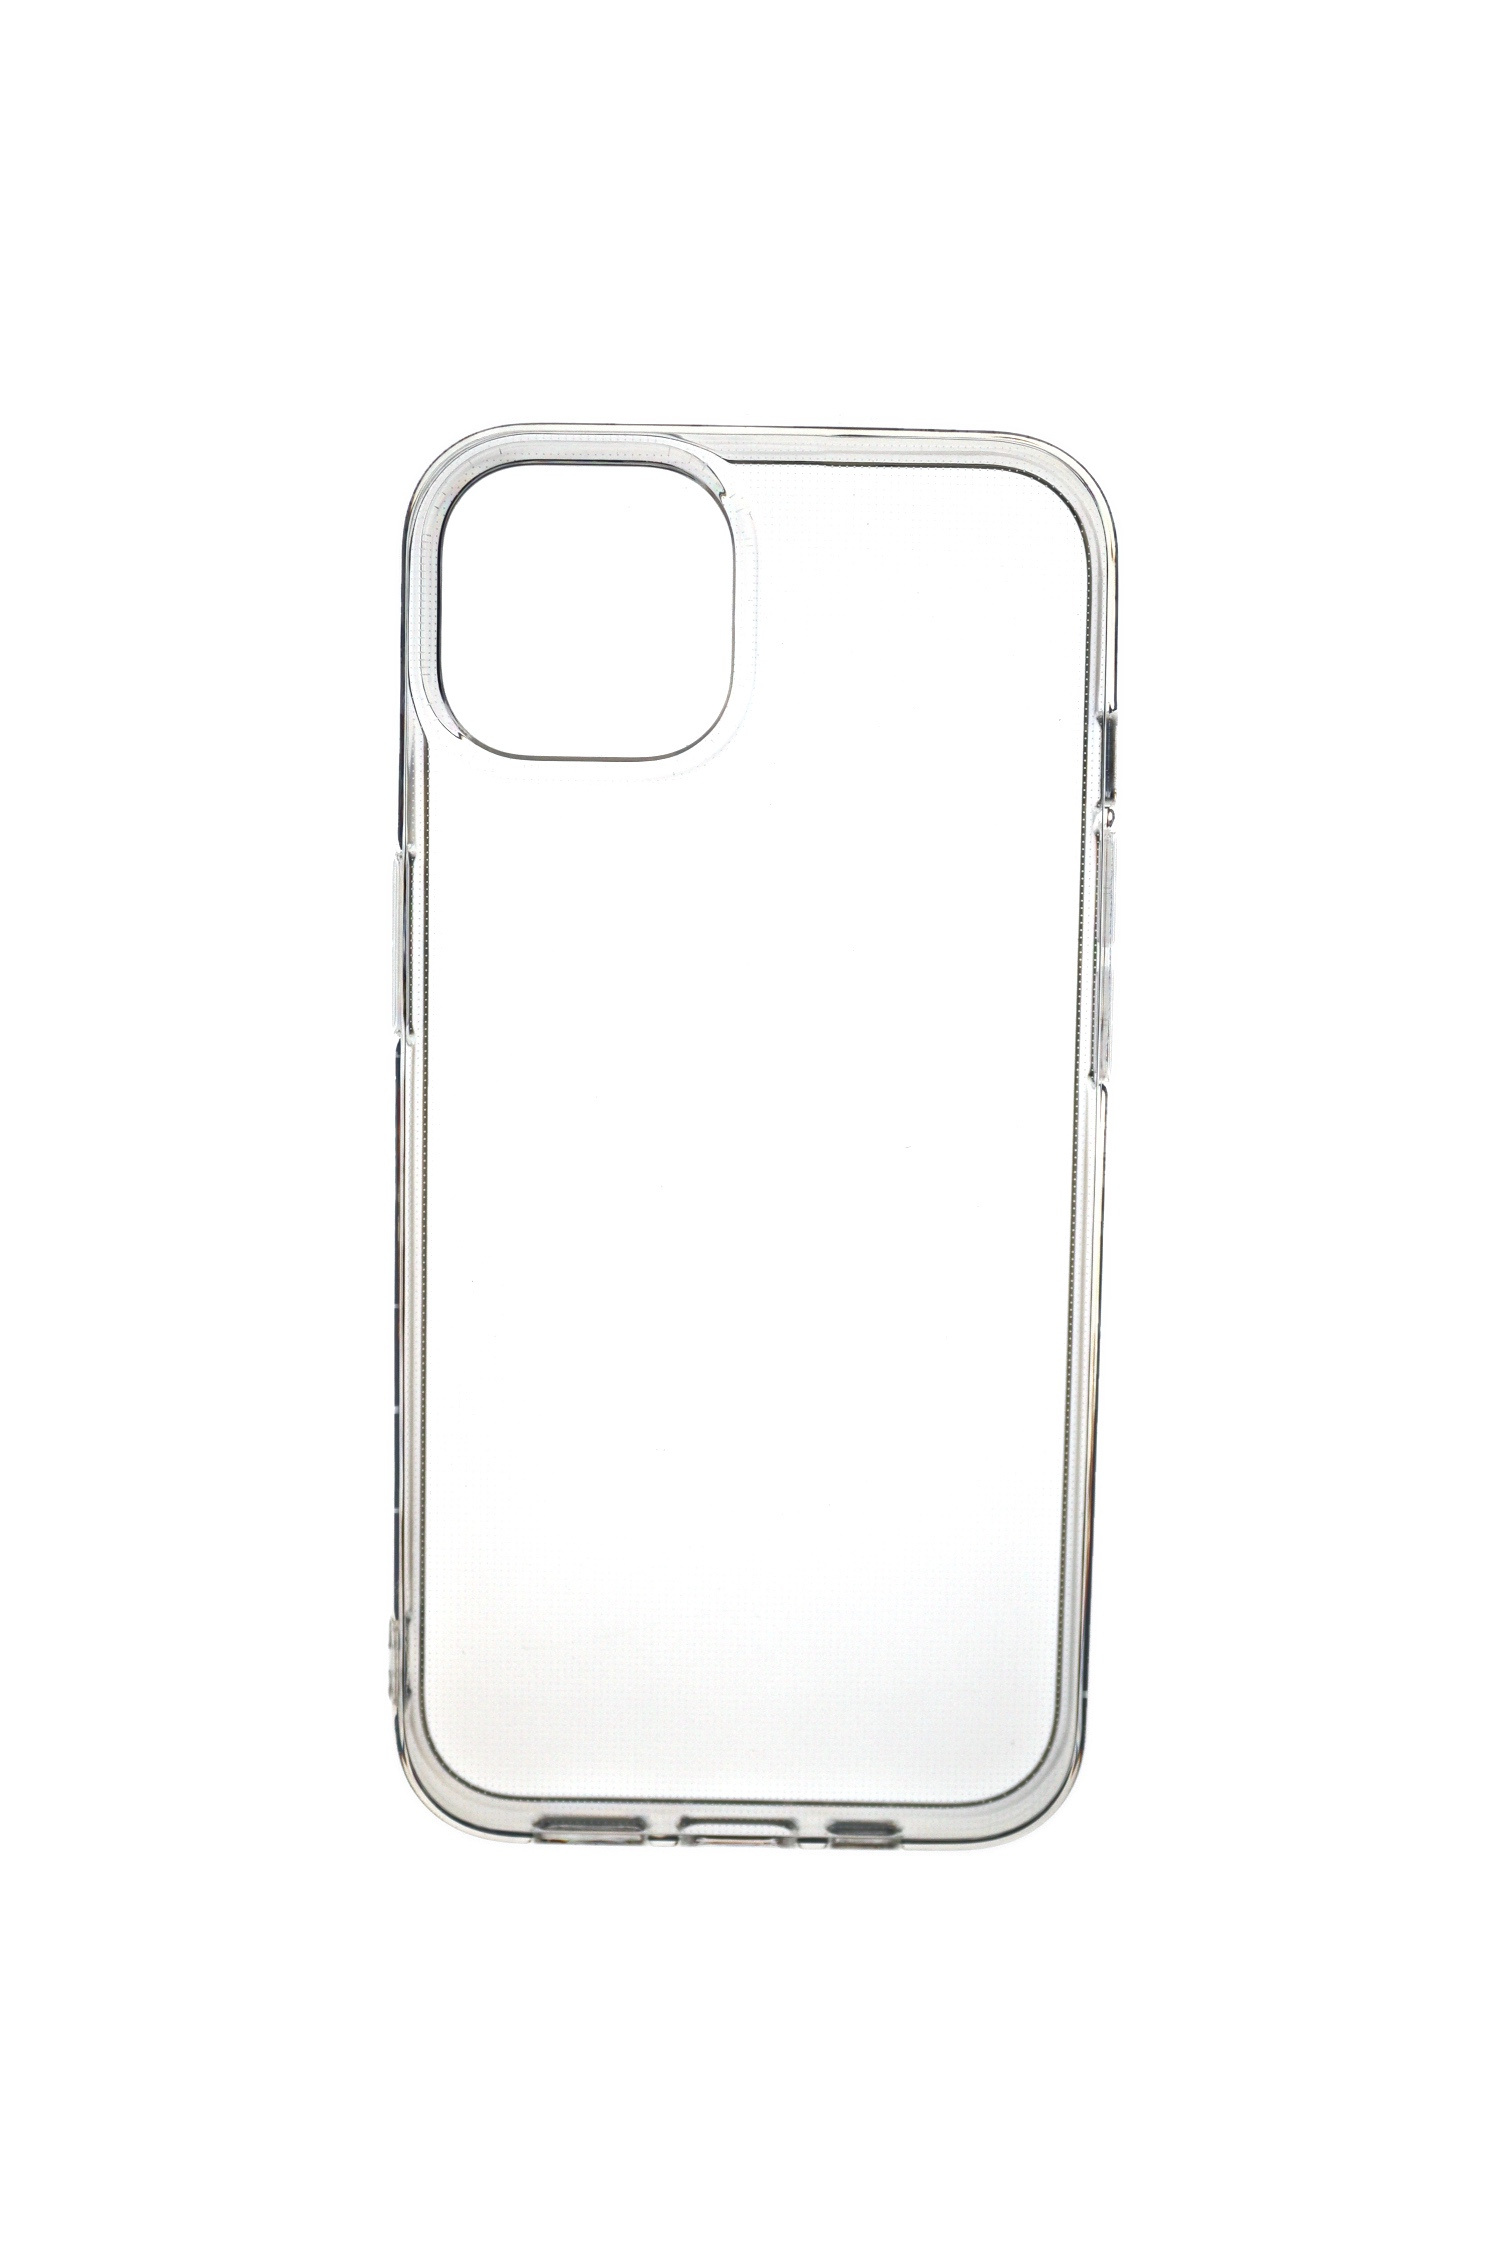 iPhone Backcover, JAMCOVER 13, Strong, TPU mm 2.0 Apple, Case Transparent